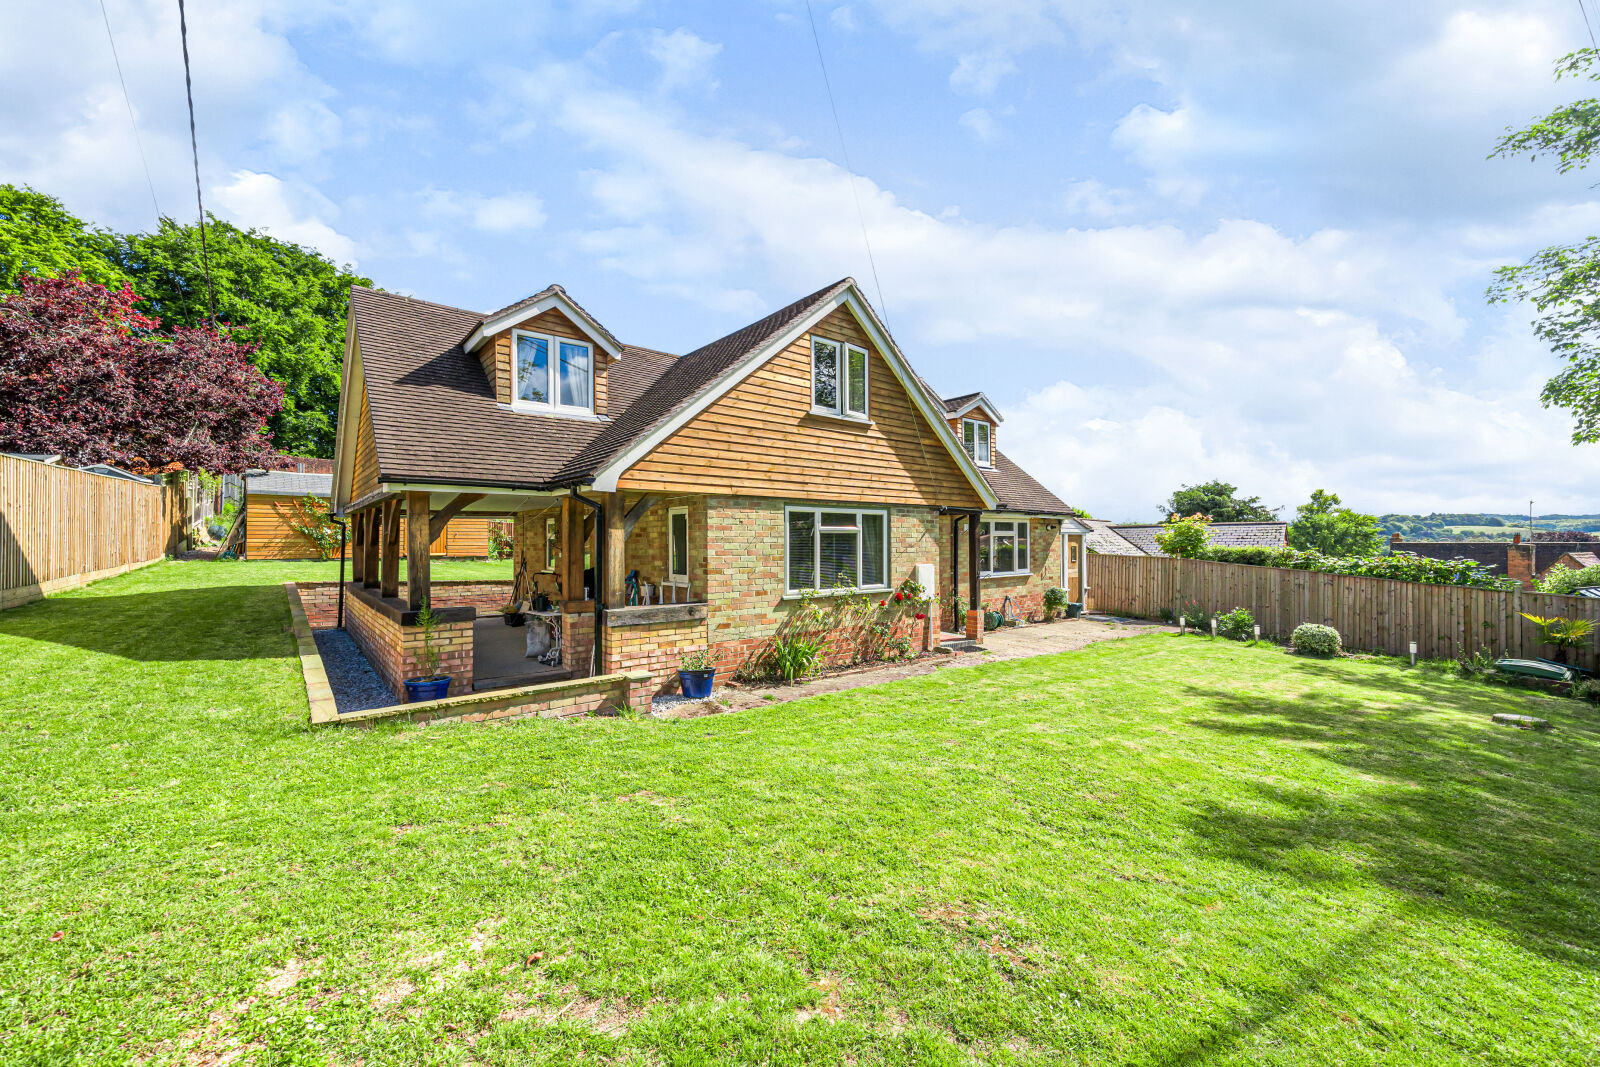 3 bedroom detached house for sale Streatley Hill, Streatley, RG8, main image